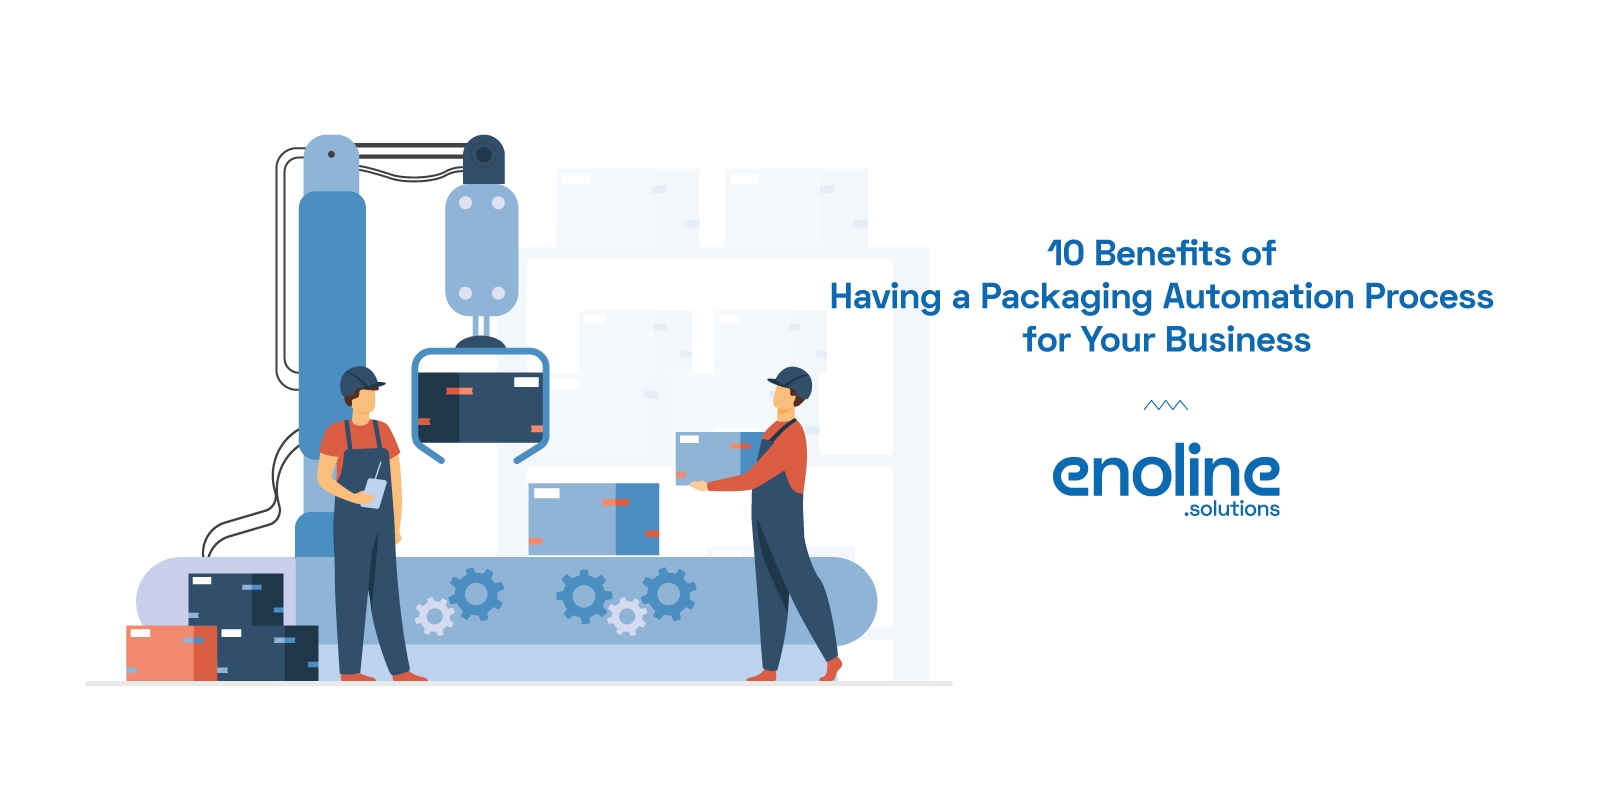 Enoline 10 benefits packaging automation process